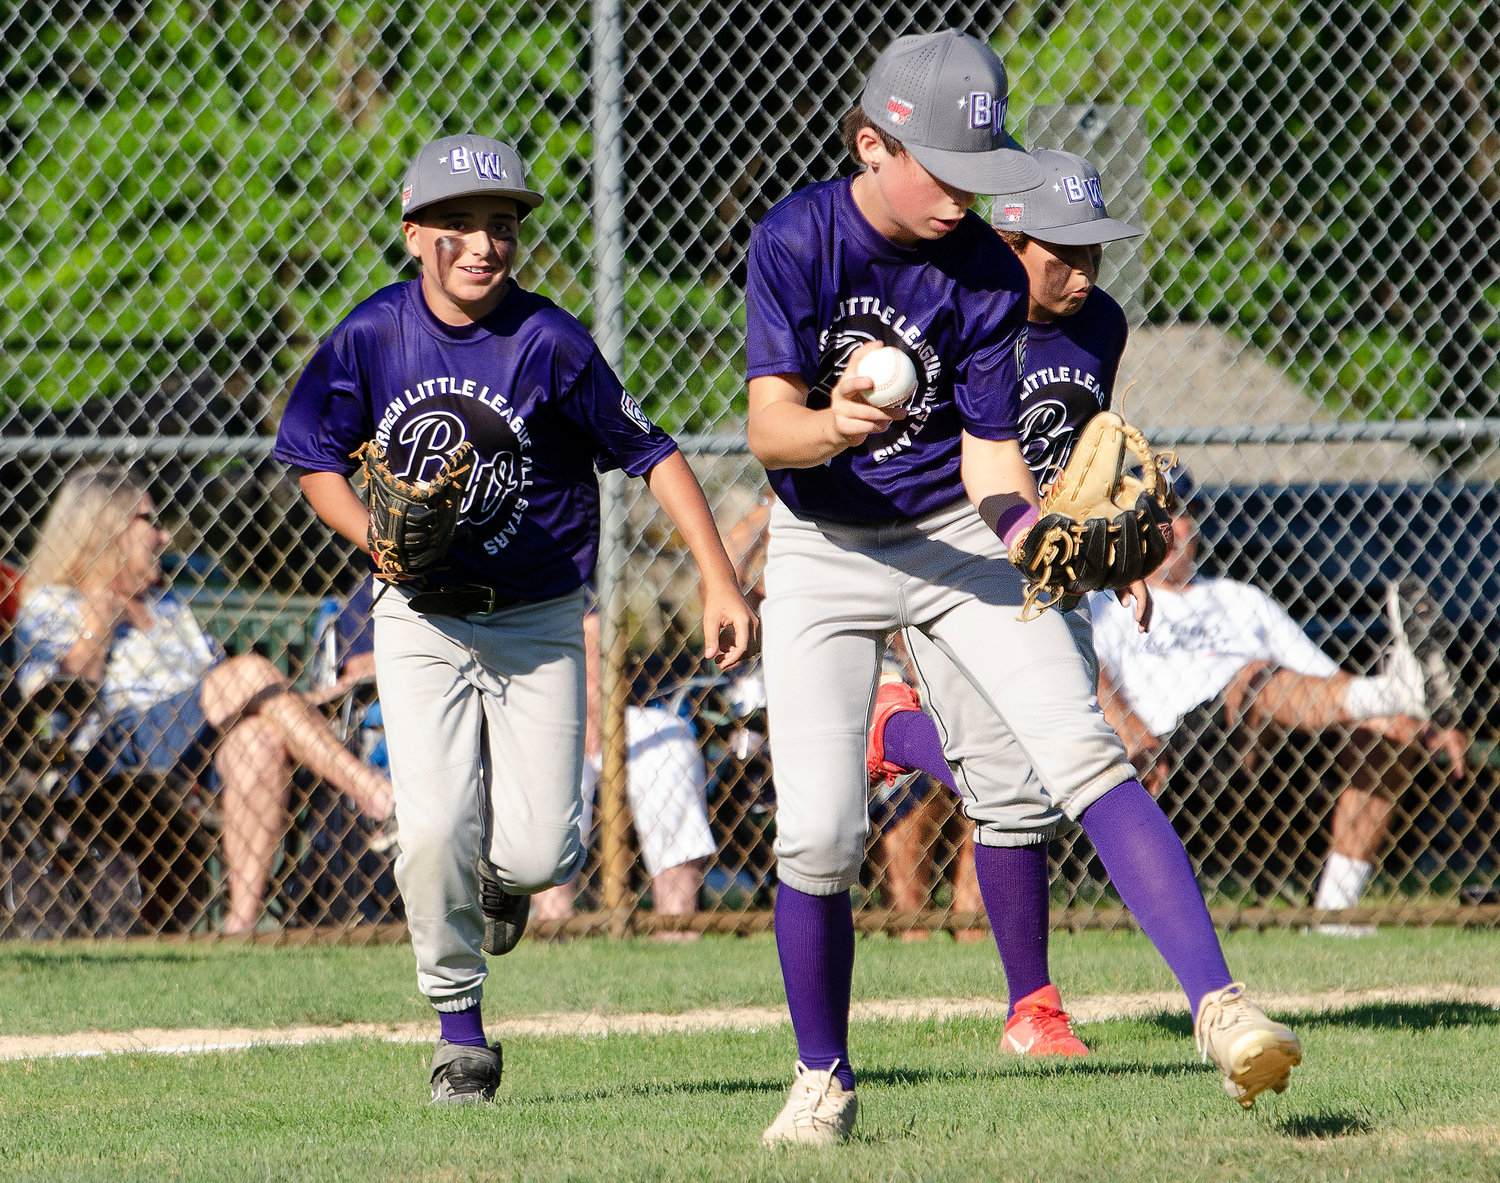 Kevin Casey (left), Parker DeWolf and another player start out to their positions to start the game.